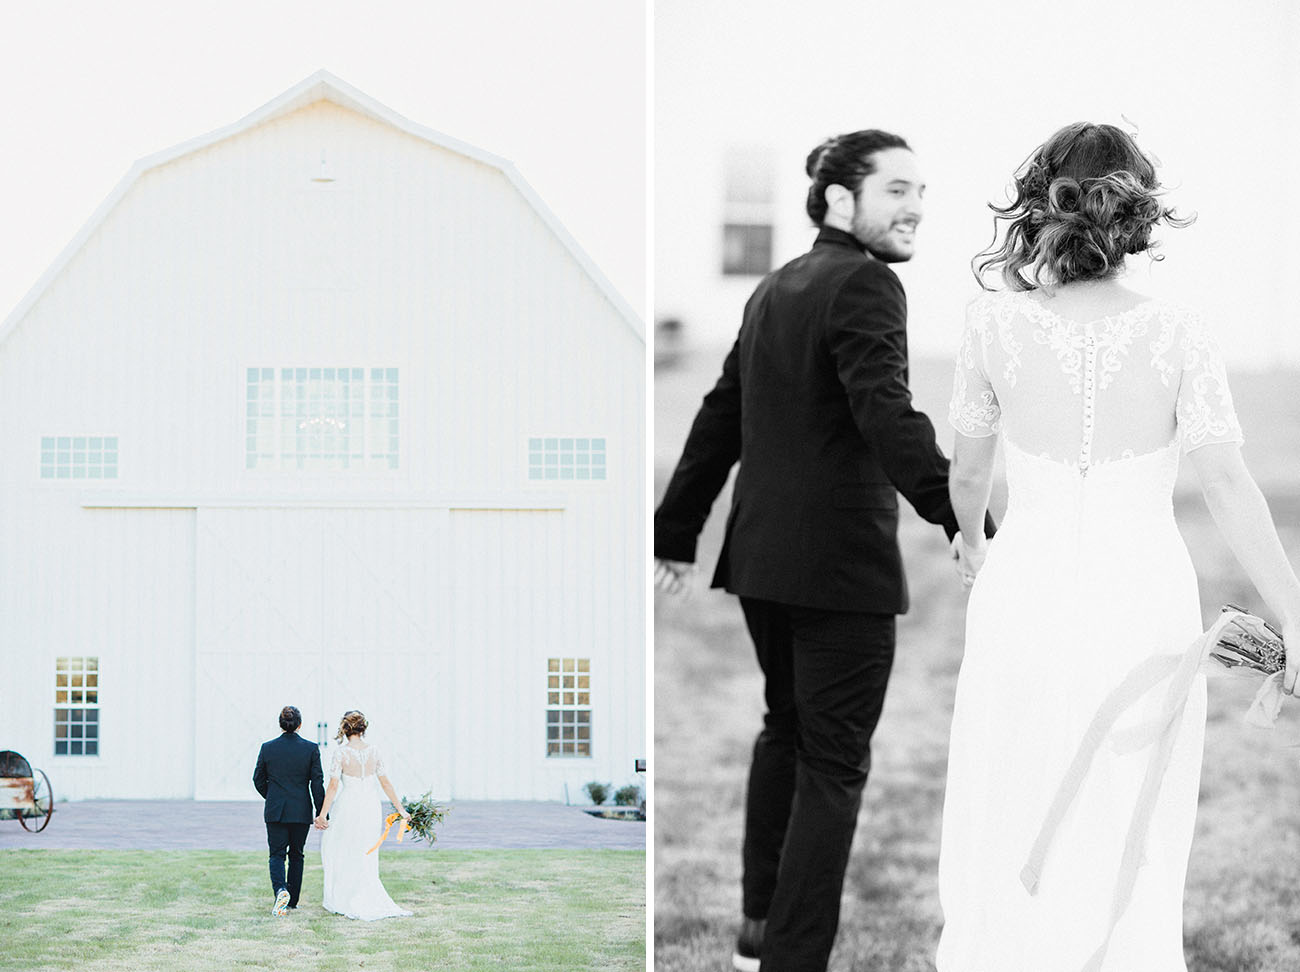 The shoot took place in a vintage white barn